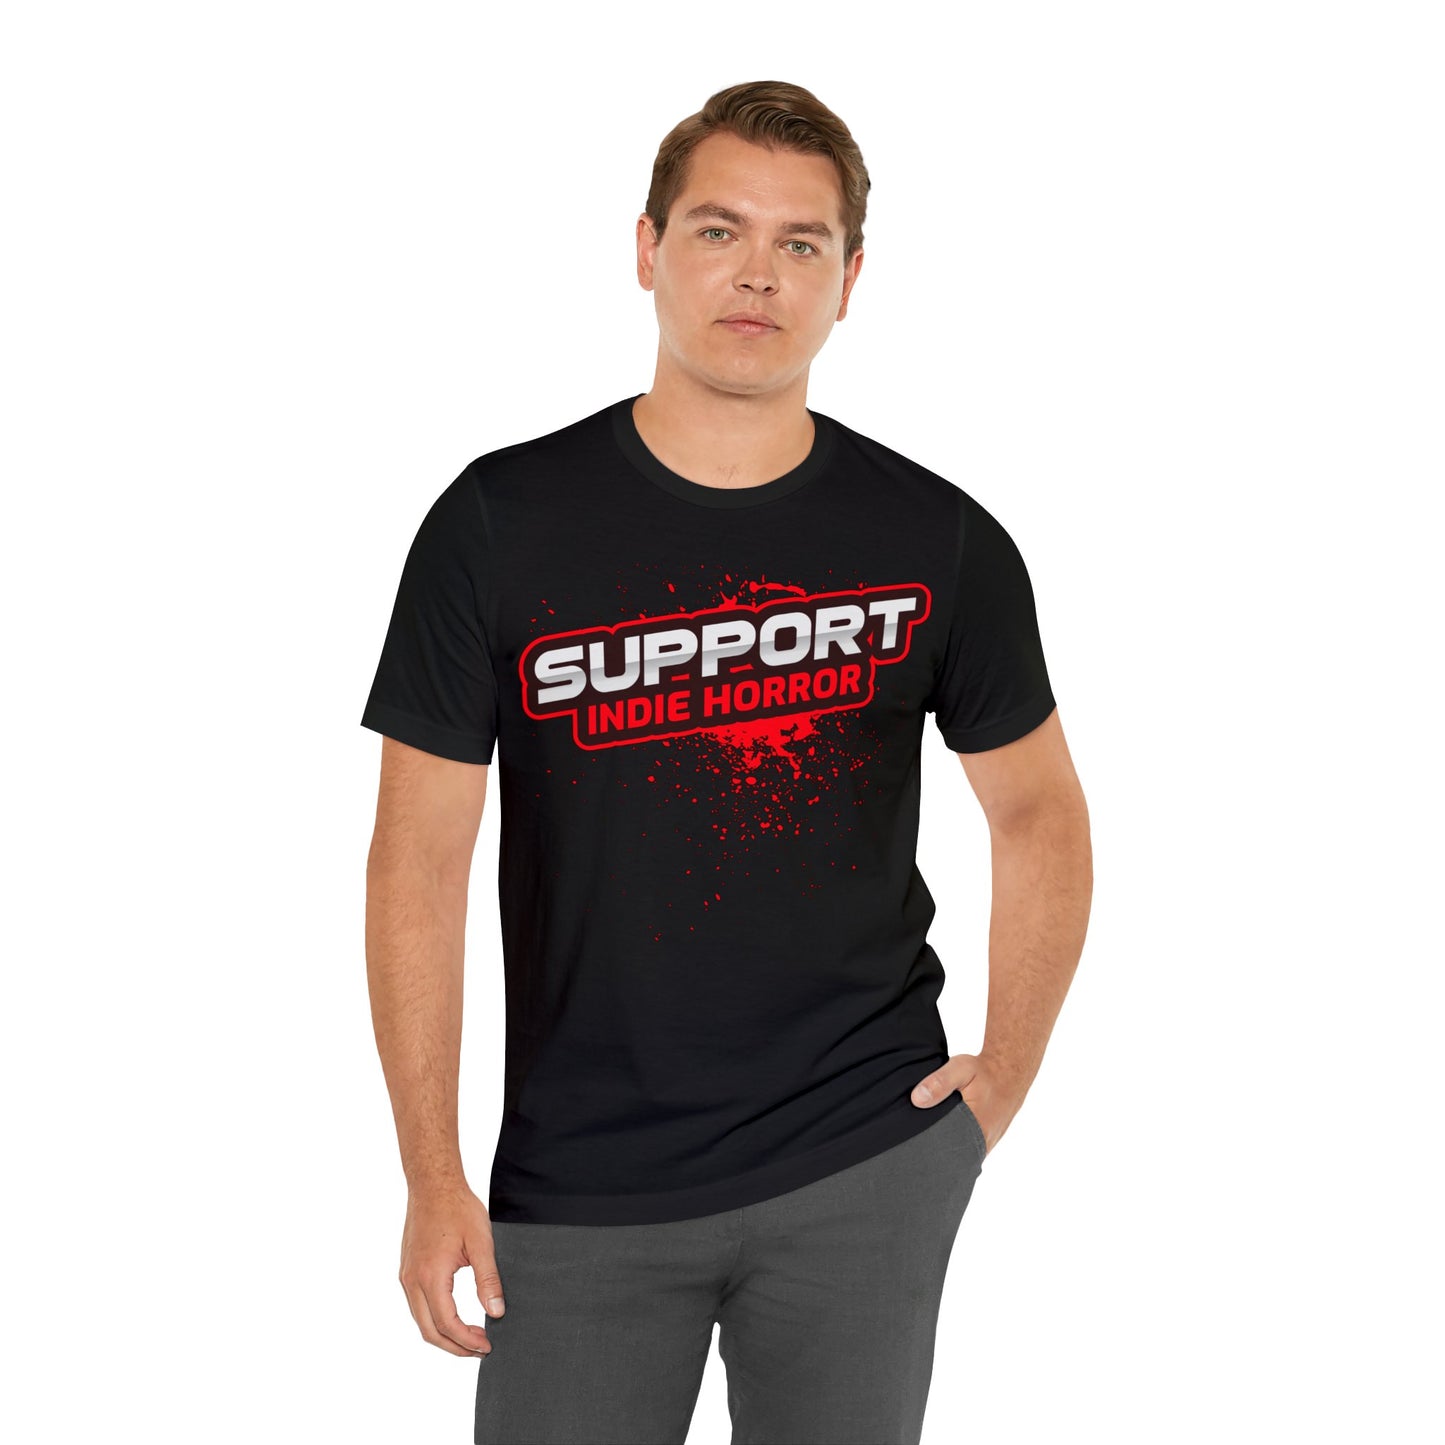 Support indie Horror T-Shirt